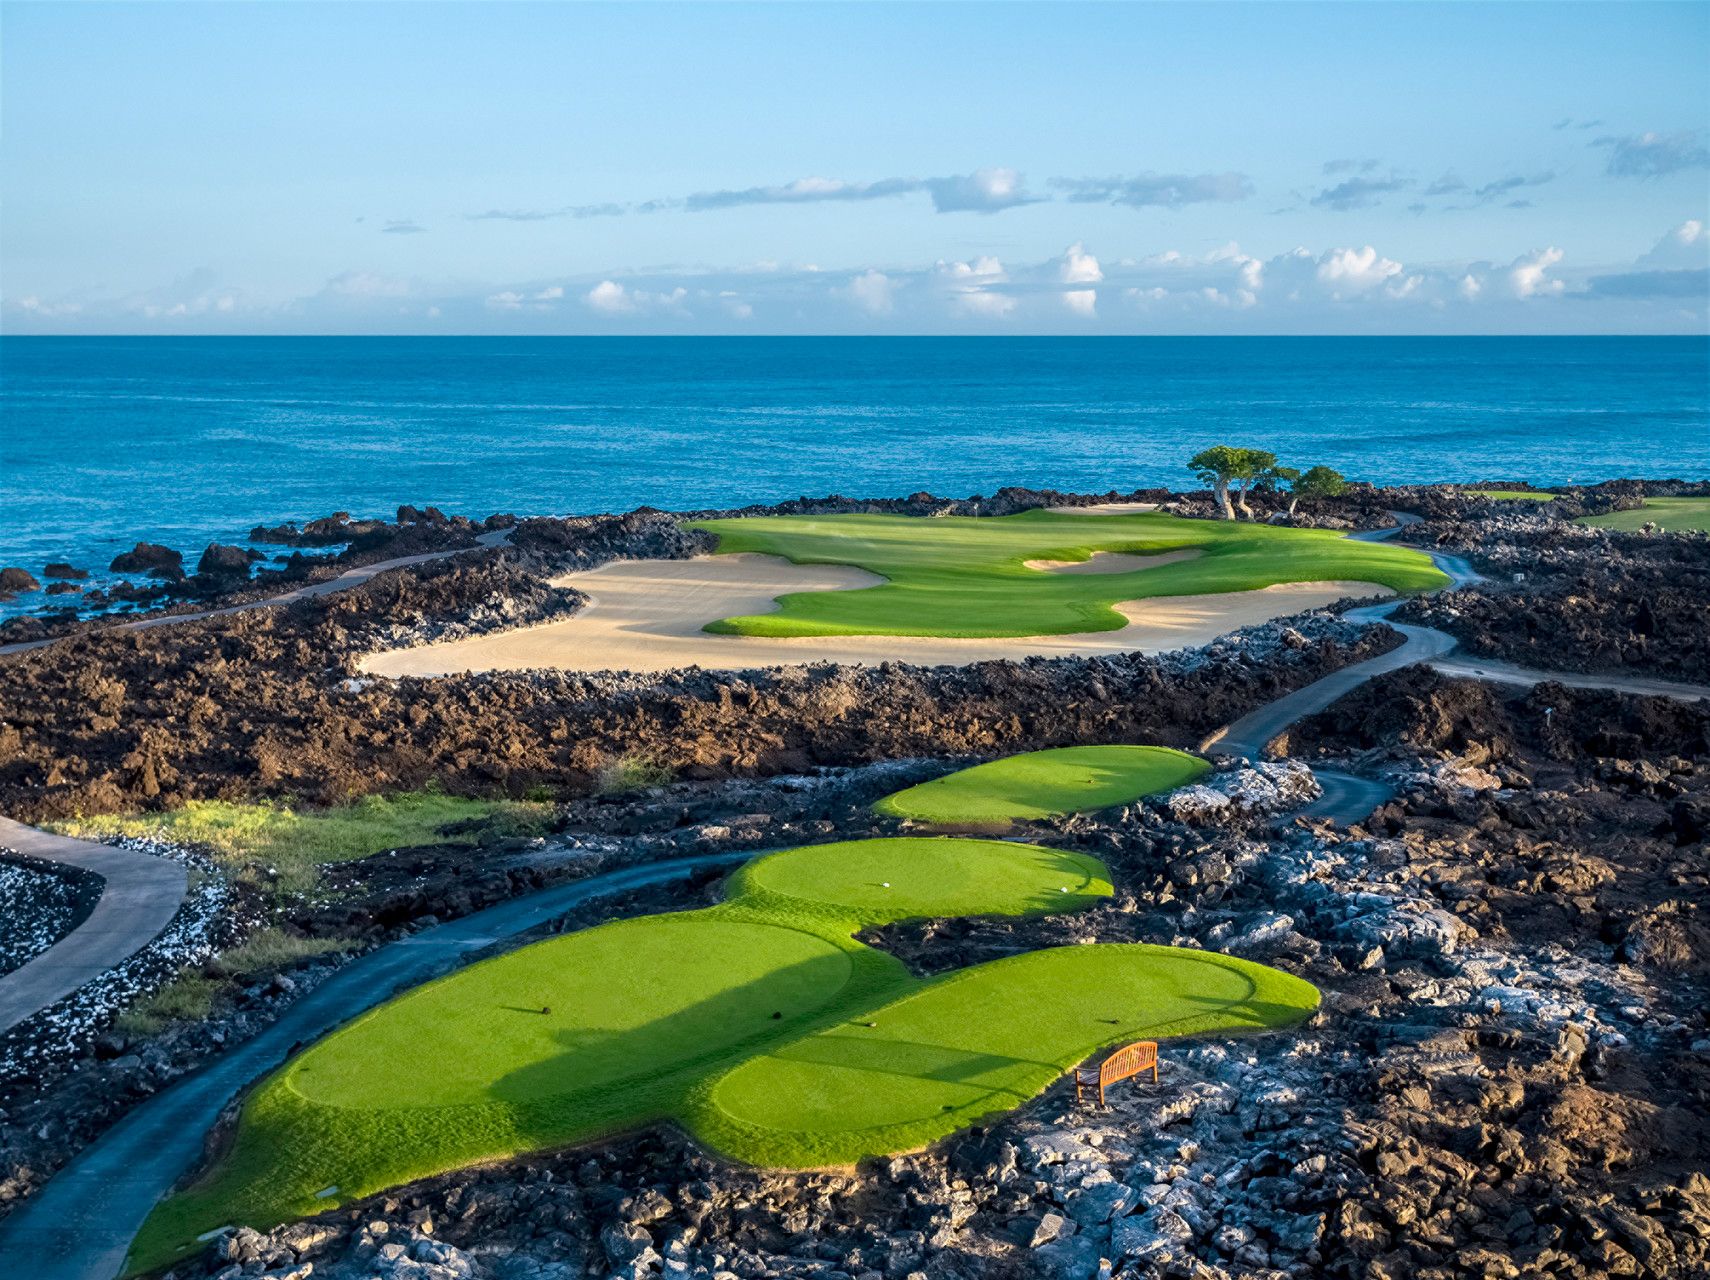 Golf travel: Hawaii’s Big Island beautiful on TV, even better in
person